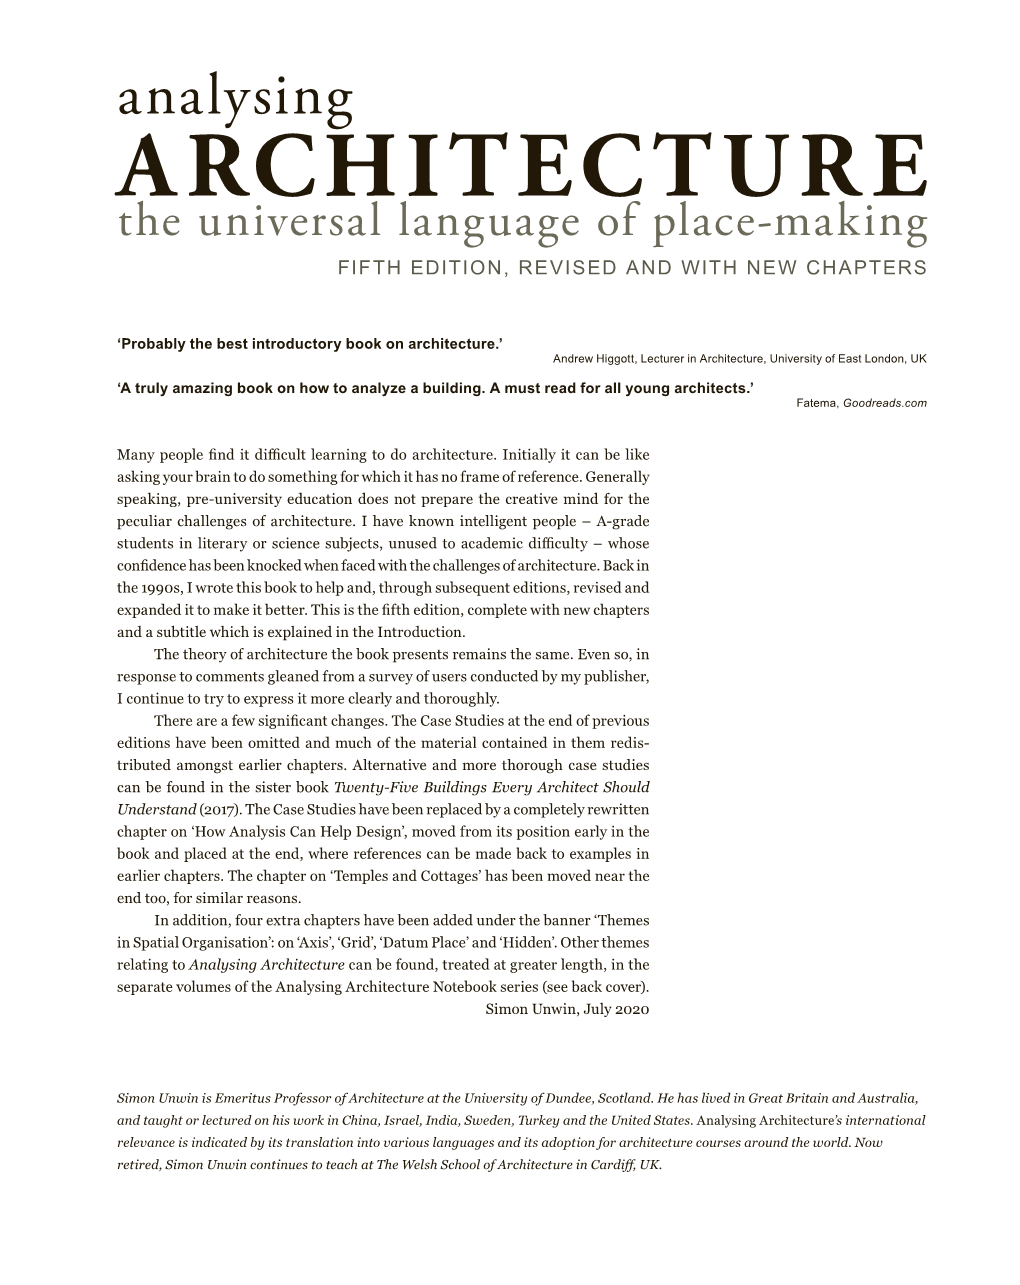 Analysing ARCHITECTURE the Universal Language of Place-Making FIFTH EDITION, REVISED and with NEW CHAPTERS